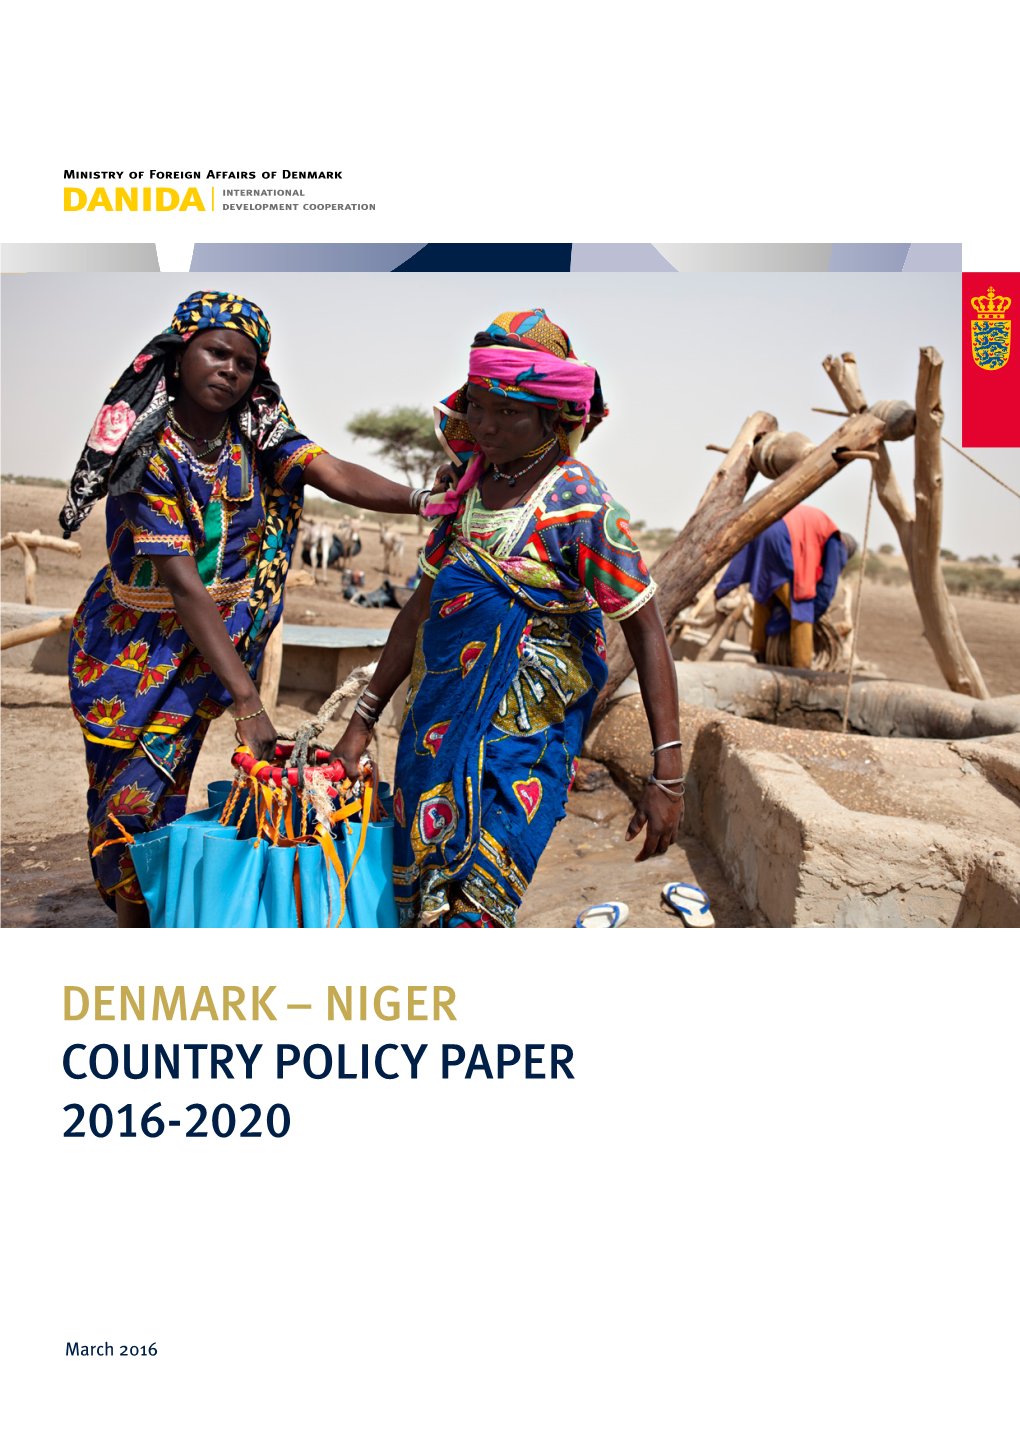 Denmark – Niger Country Policy Paper 2016-2020